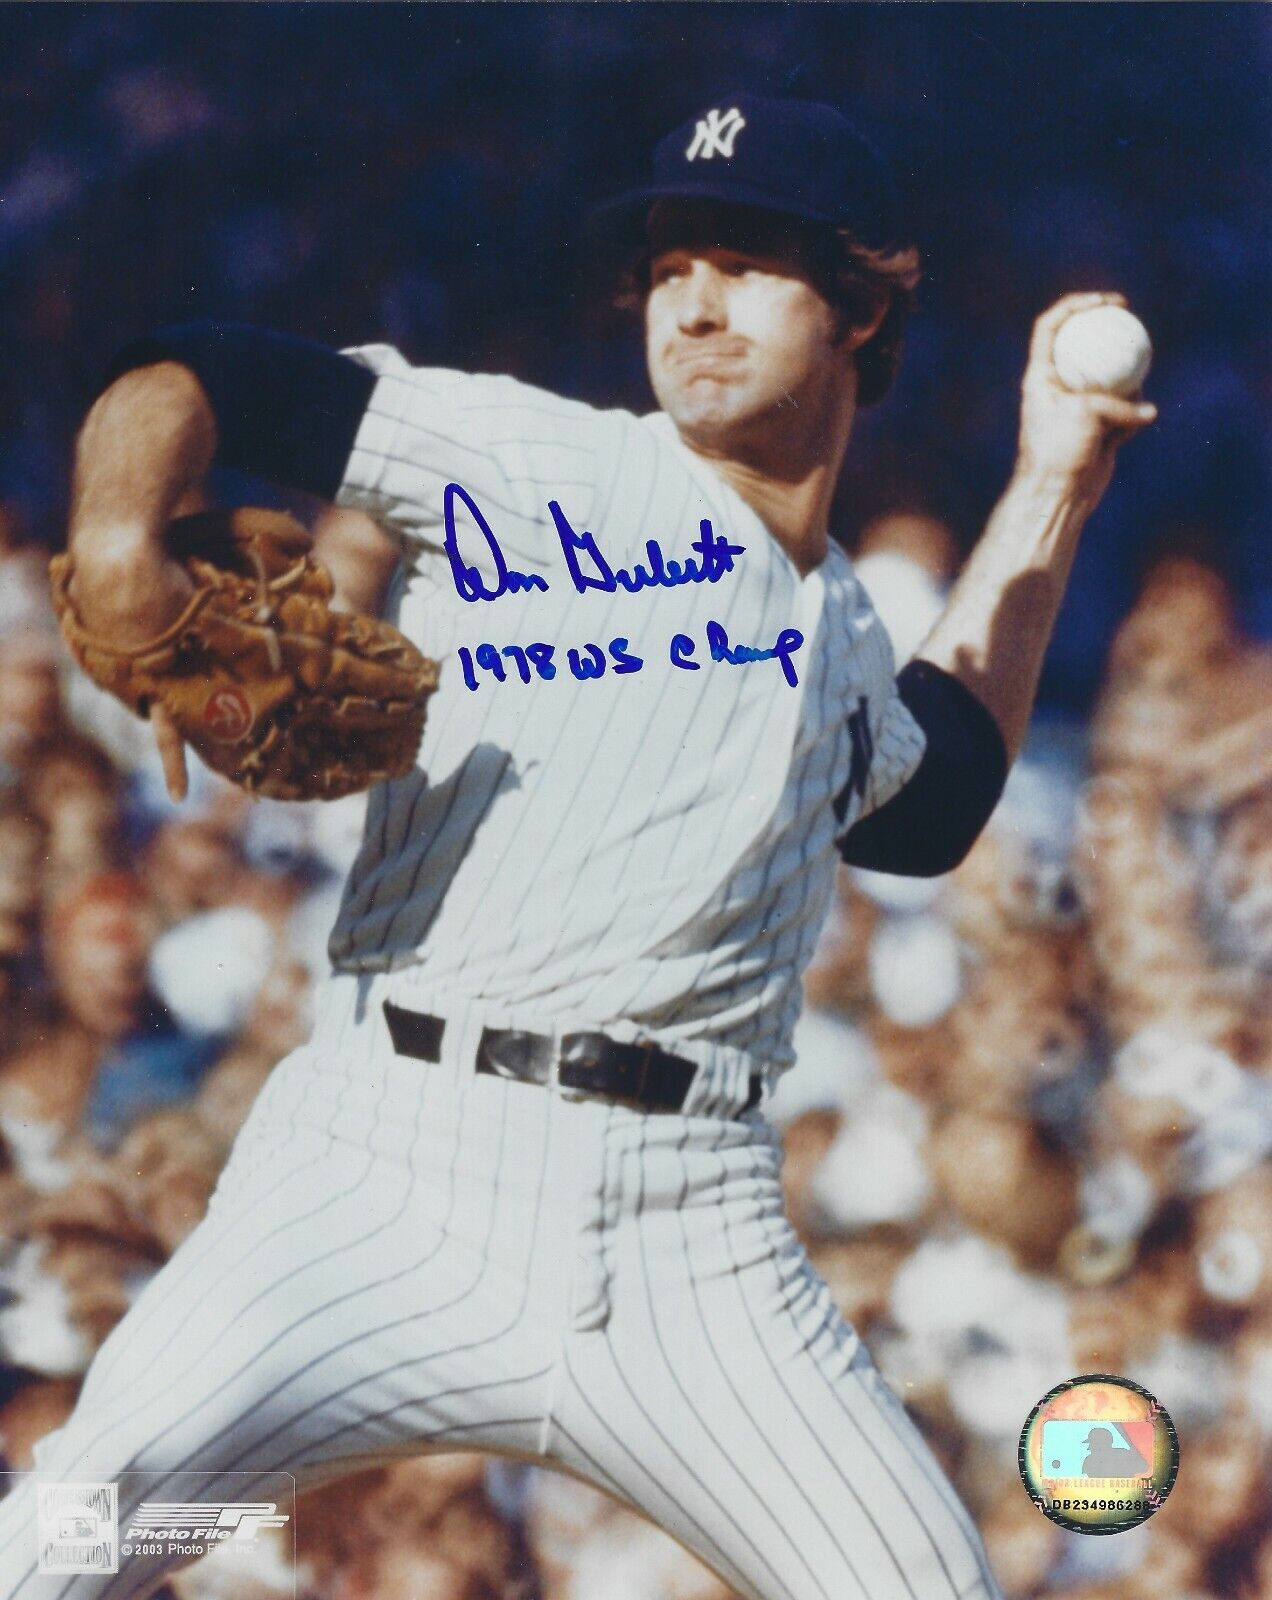 Autographed 8x10 DON GULLETT 1978 WS Champ